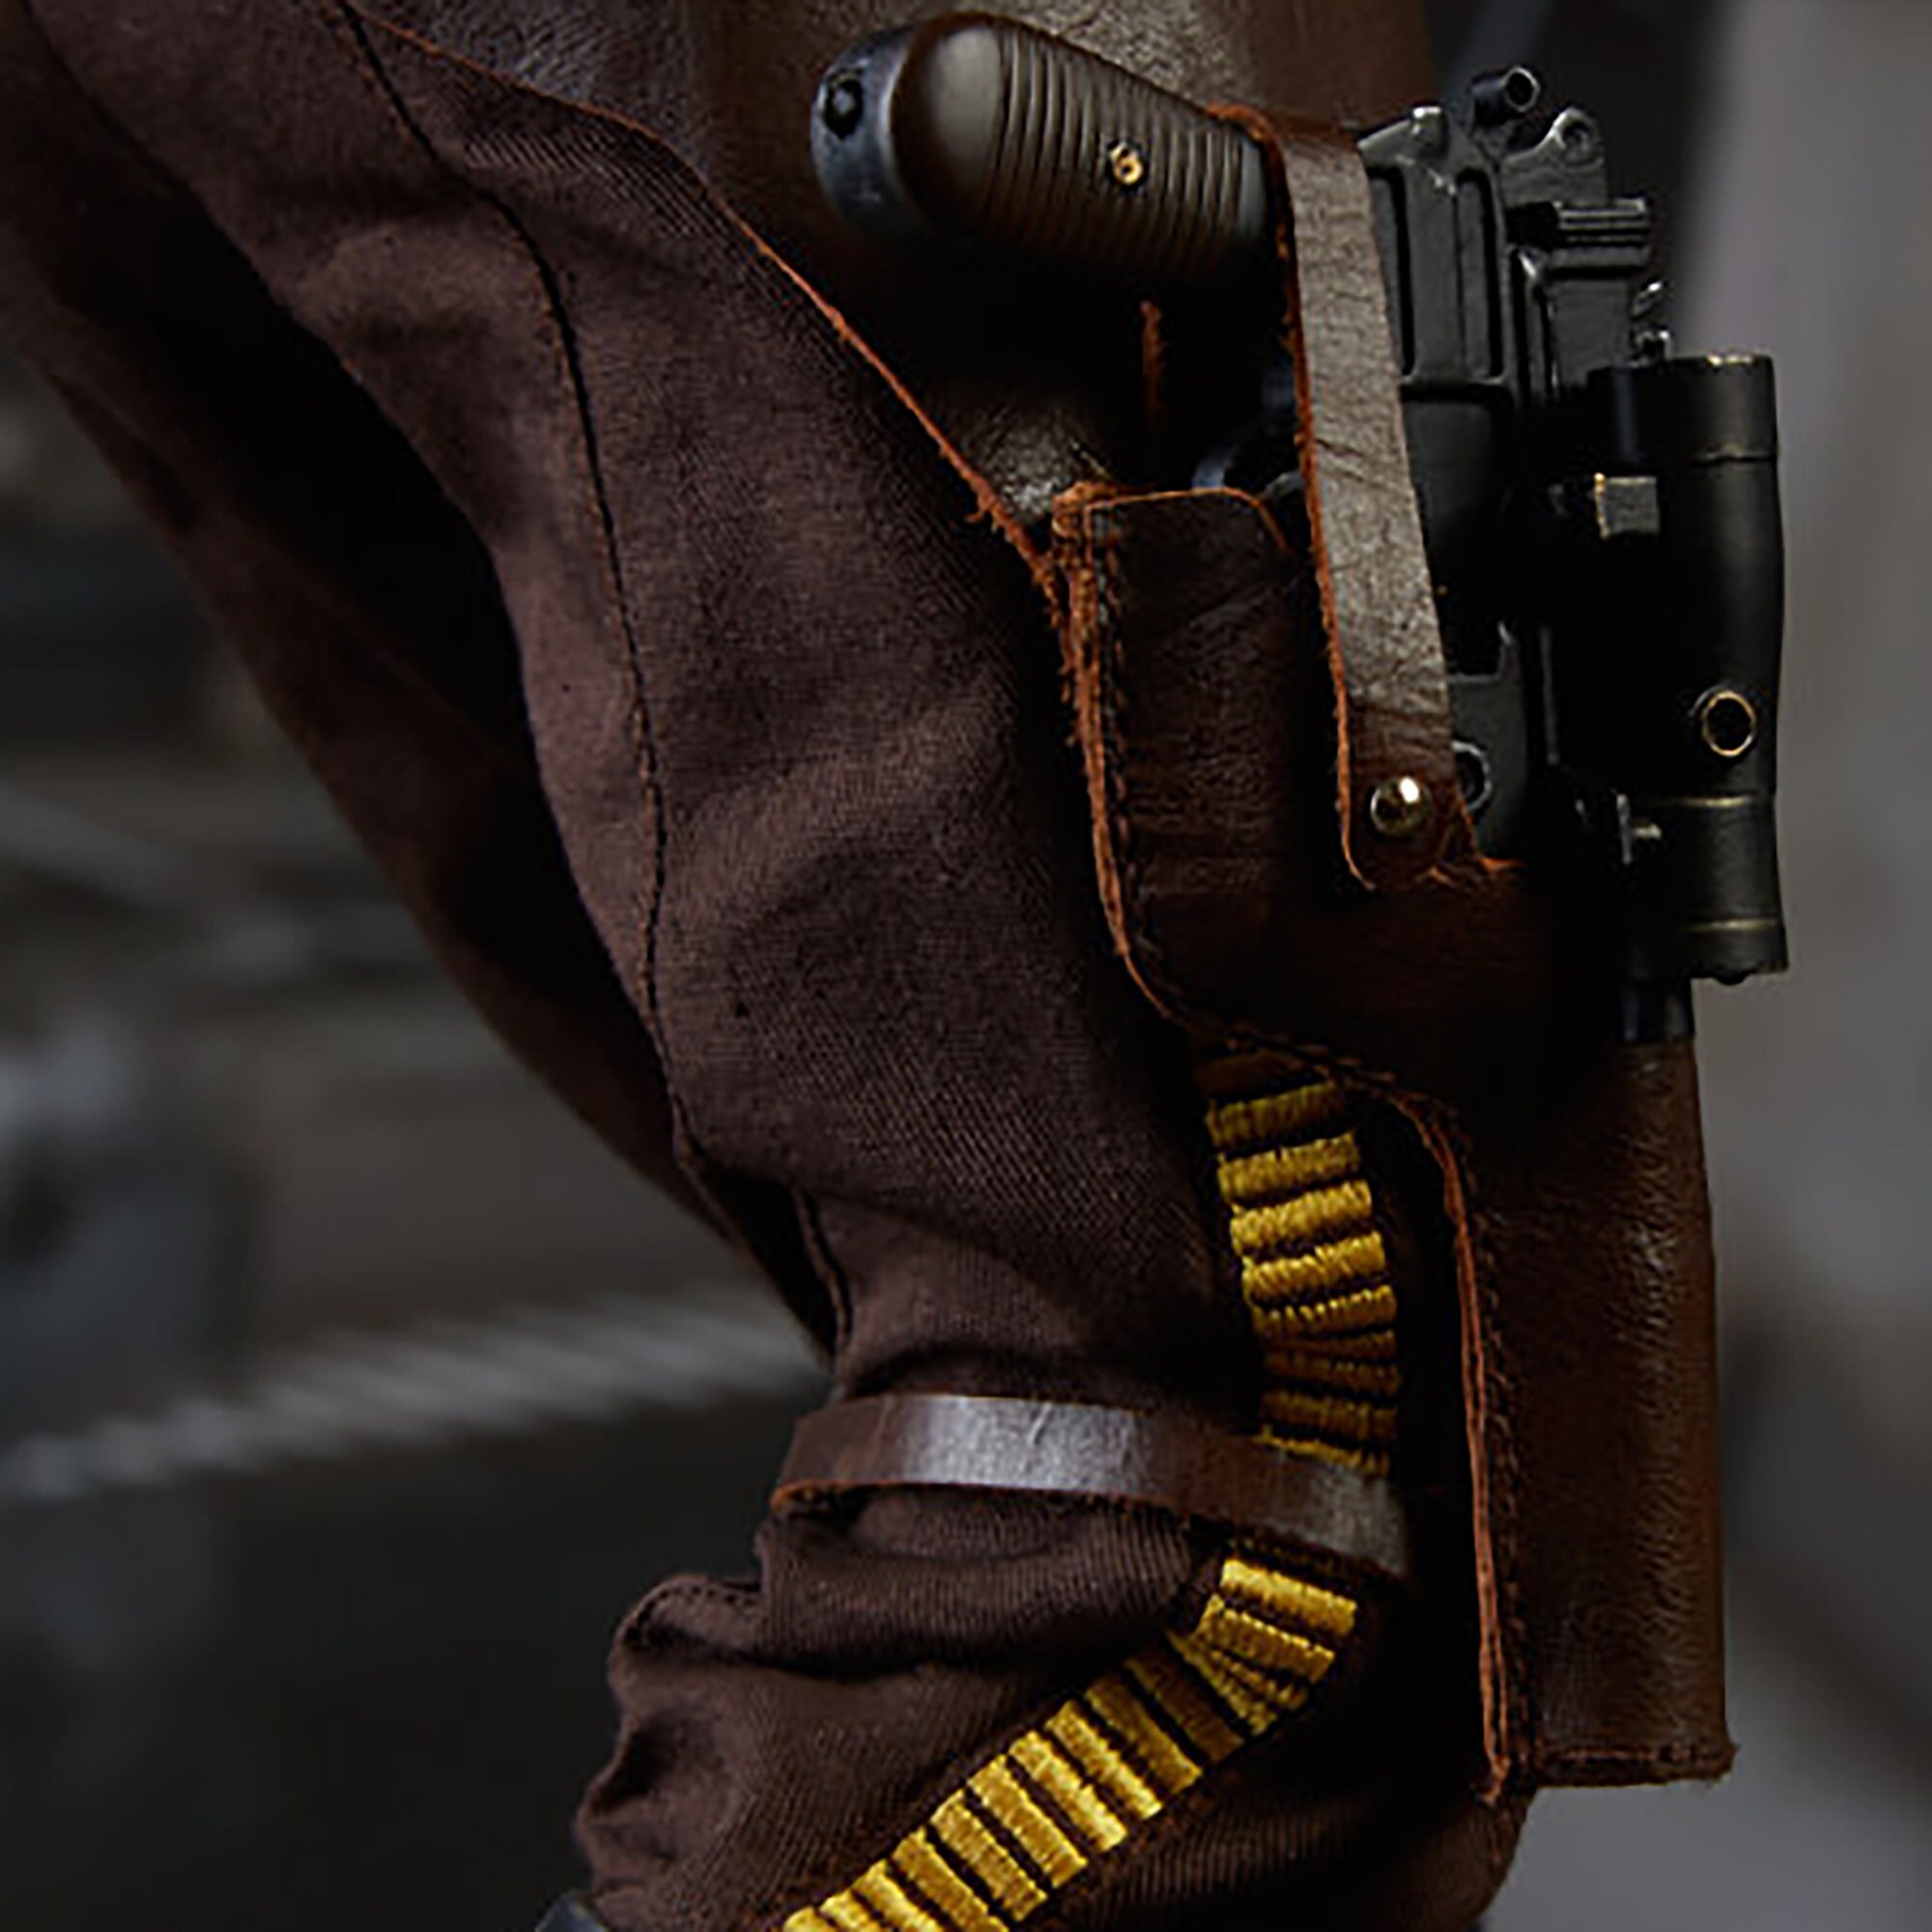 Han Solo Premium Format Figure by Sideshow Collectibles - Limited Edition